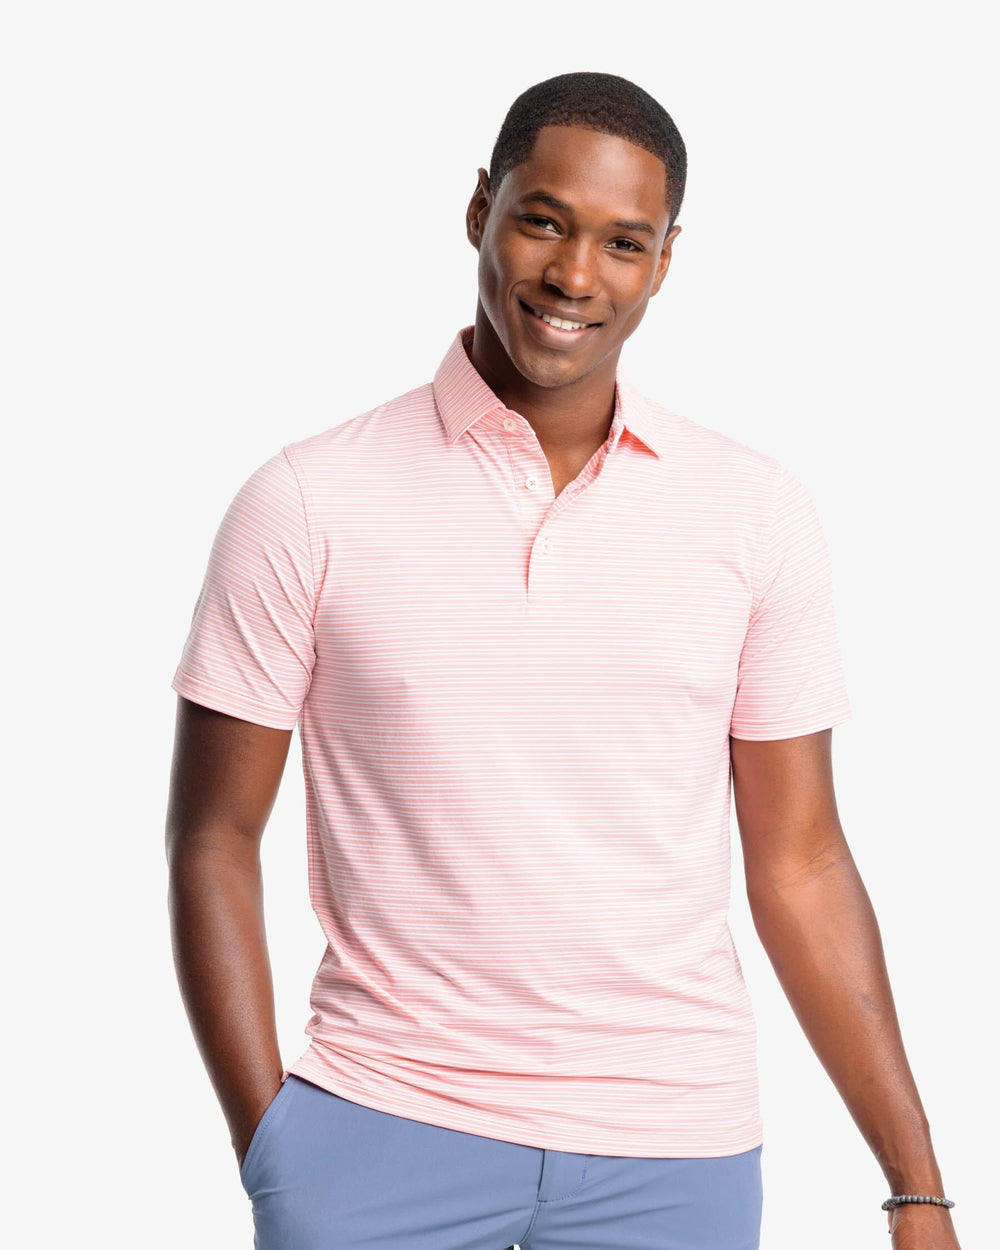 The front view of the Southern Tide brrr-eeze Millwood Stripe Performance Polo Shirt by Southern Tide - Flamingo Pink